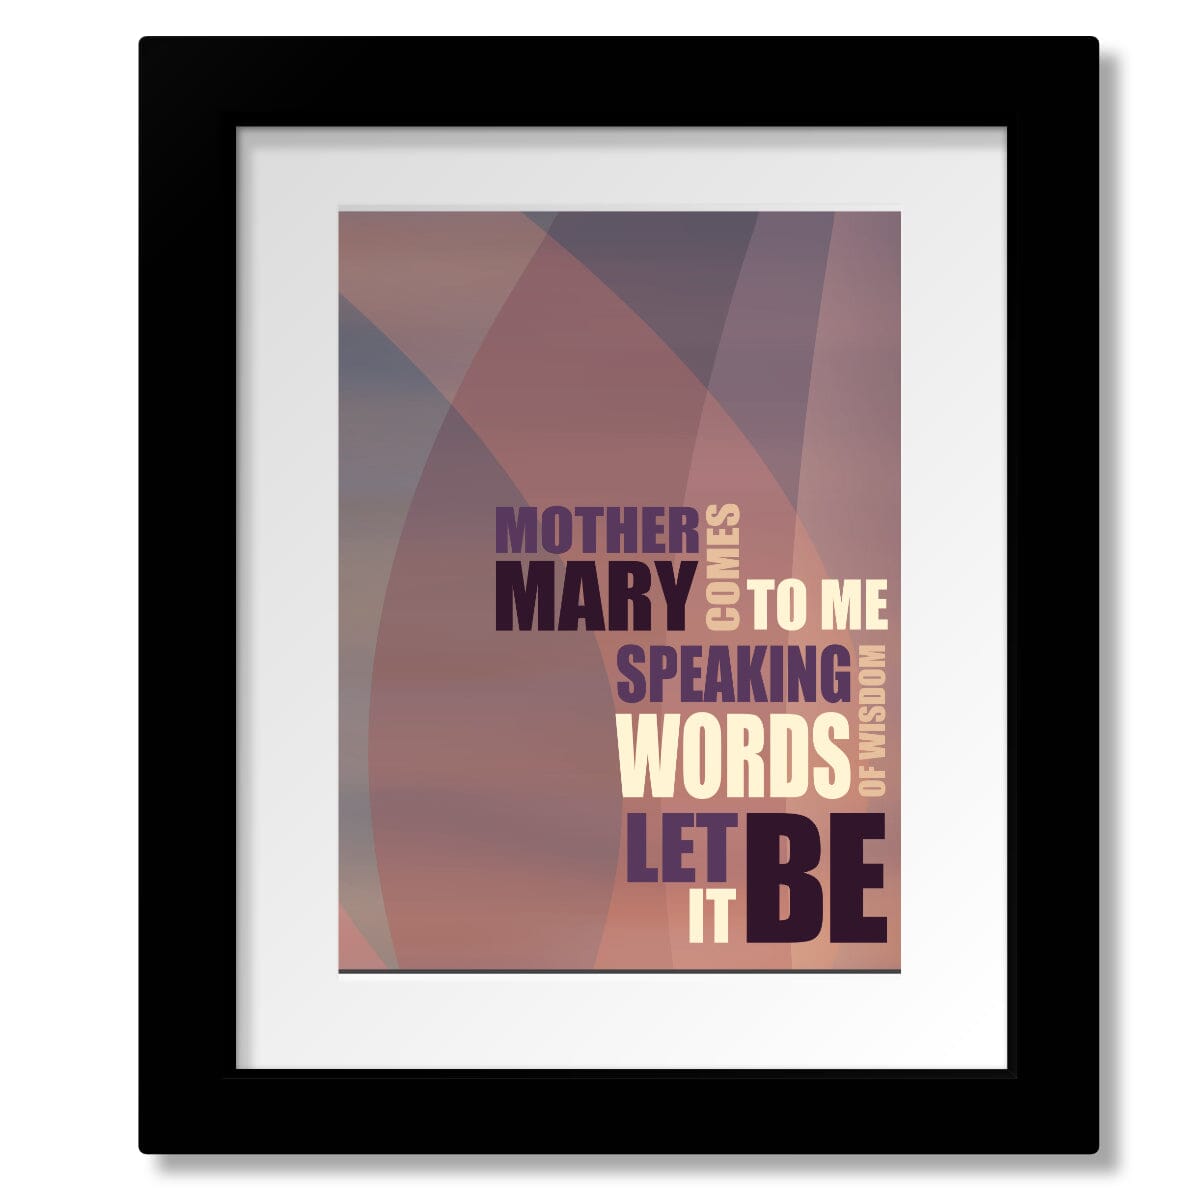 Let It Be by the Beatles - Wall Music Song Lyric Art Print Song Lyrics Art Song Lyrics Art 8x10 Matted and Framed Print 